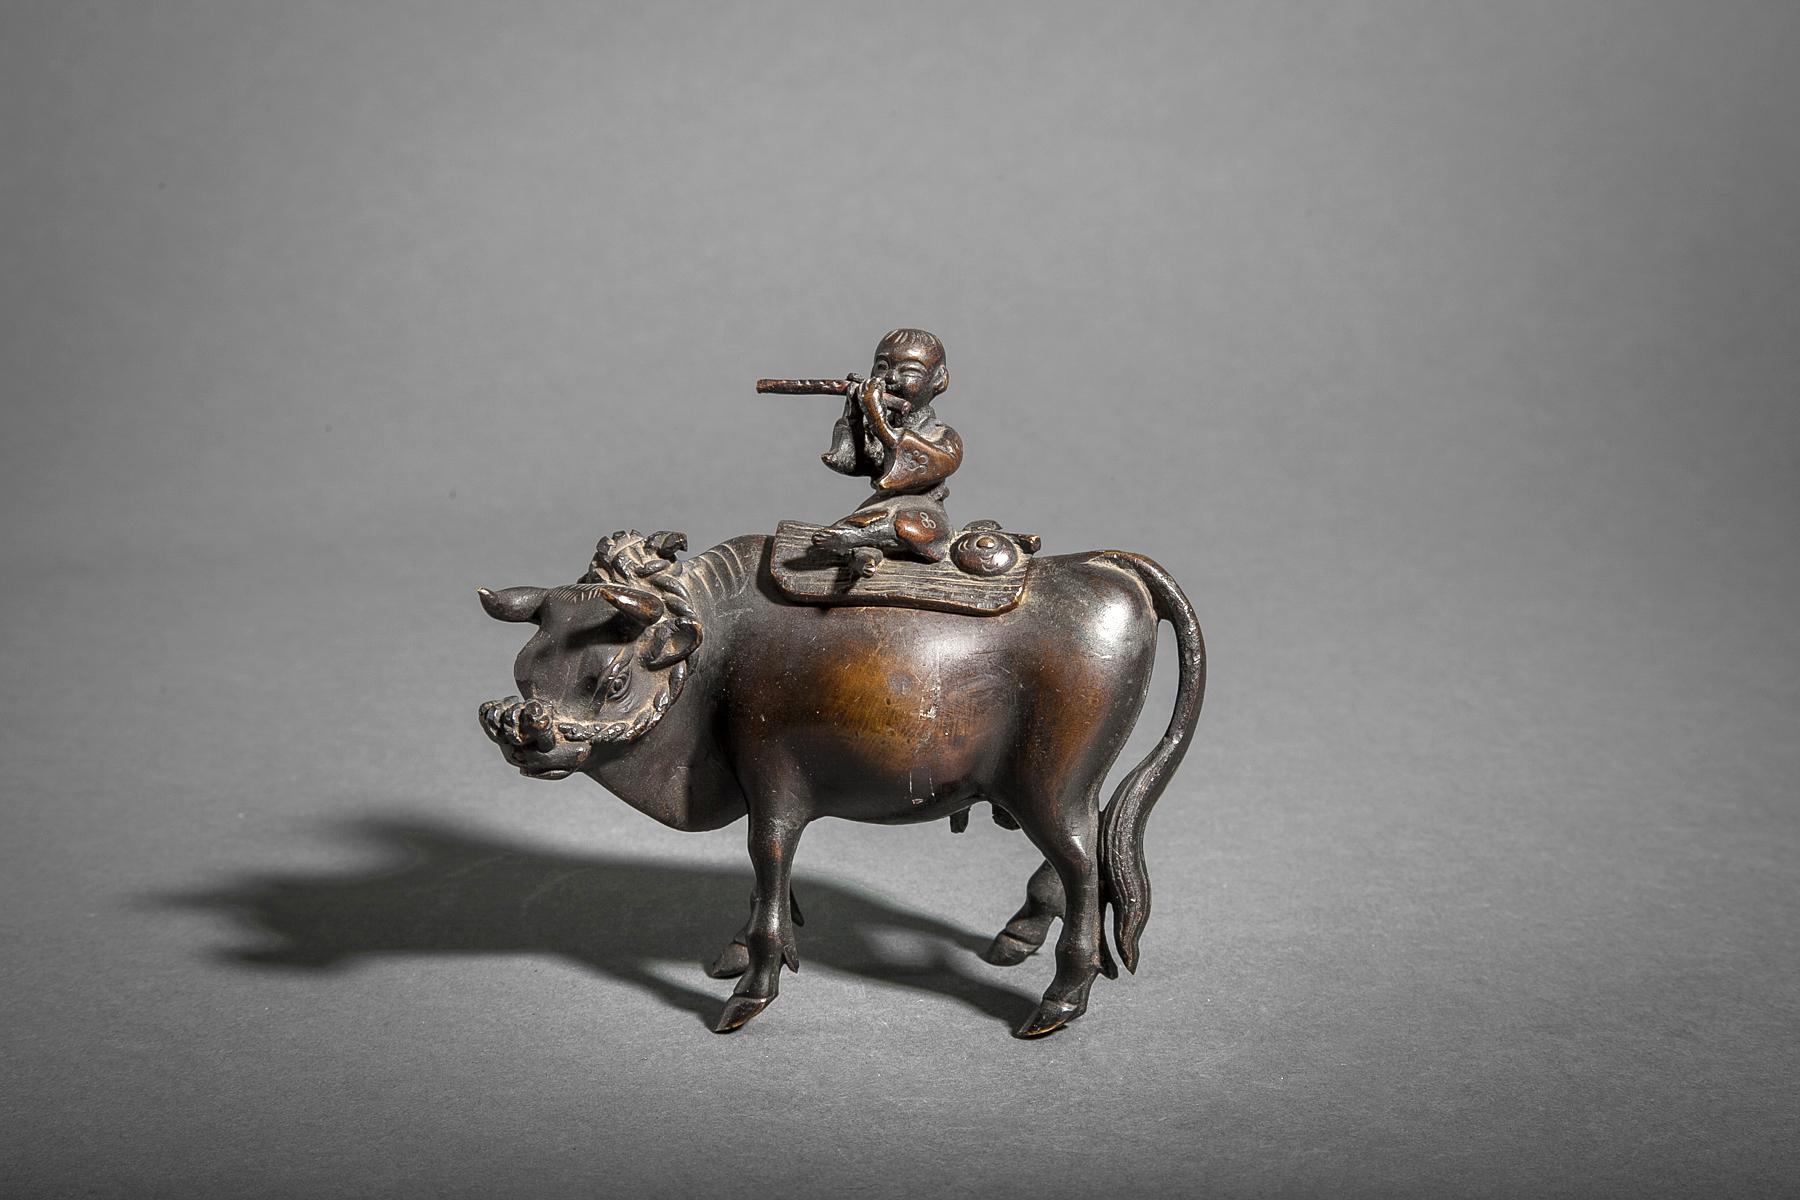 An incense burner in the shape of a boy playing a flute while riding a bull. The boy is the removable top to the incense receptacle located inside the bull's body.